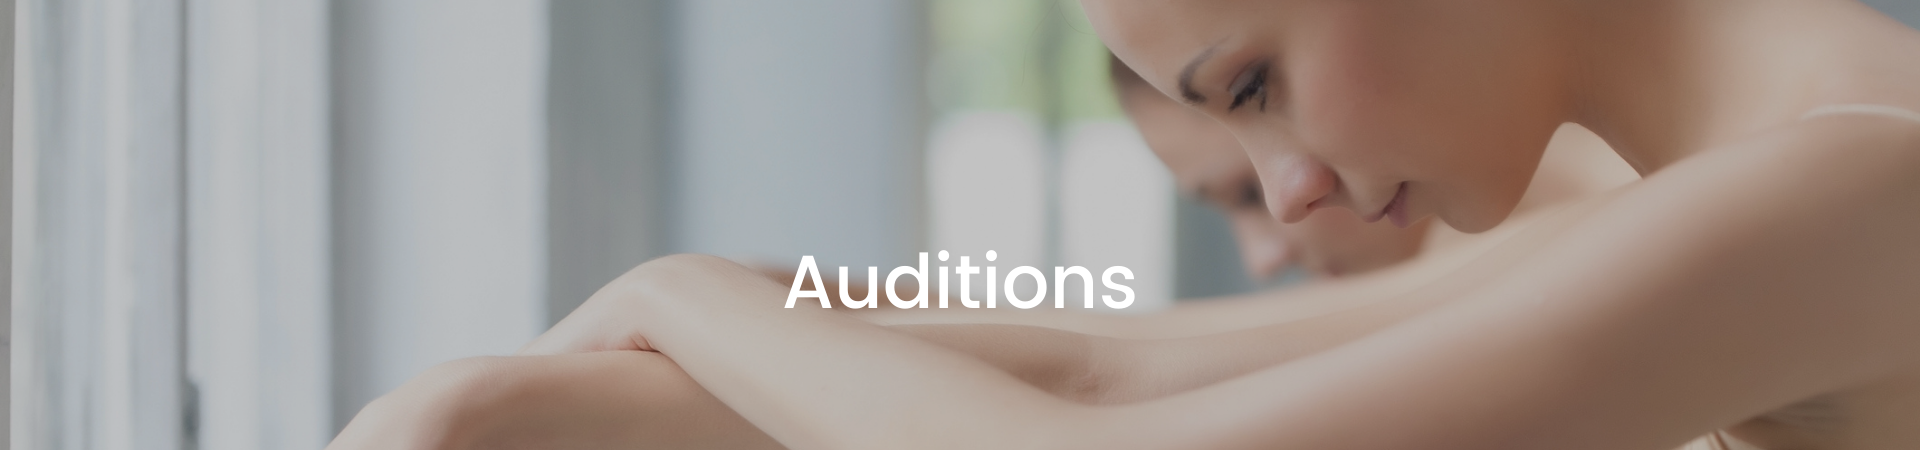 Ballet Hispánico School of Dance announces Pre-Professional Program Auditions for 2022-23 School Year